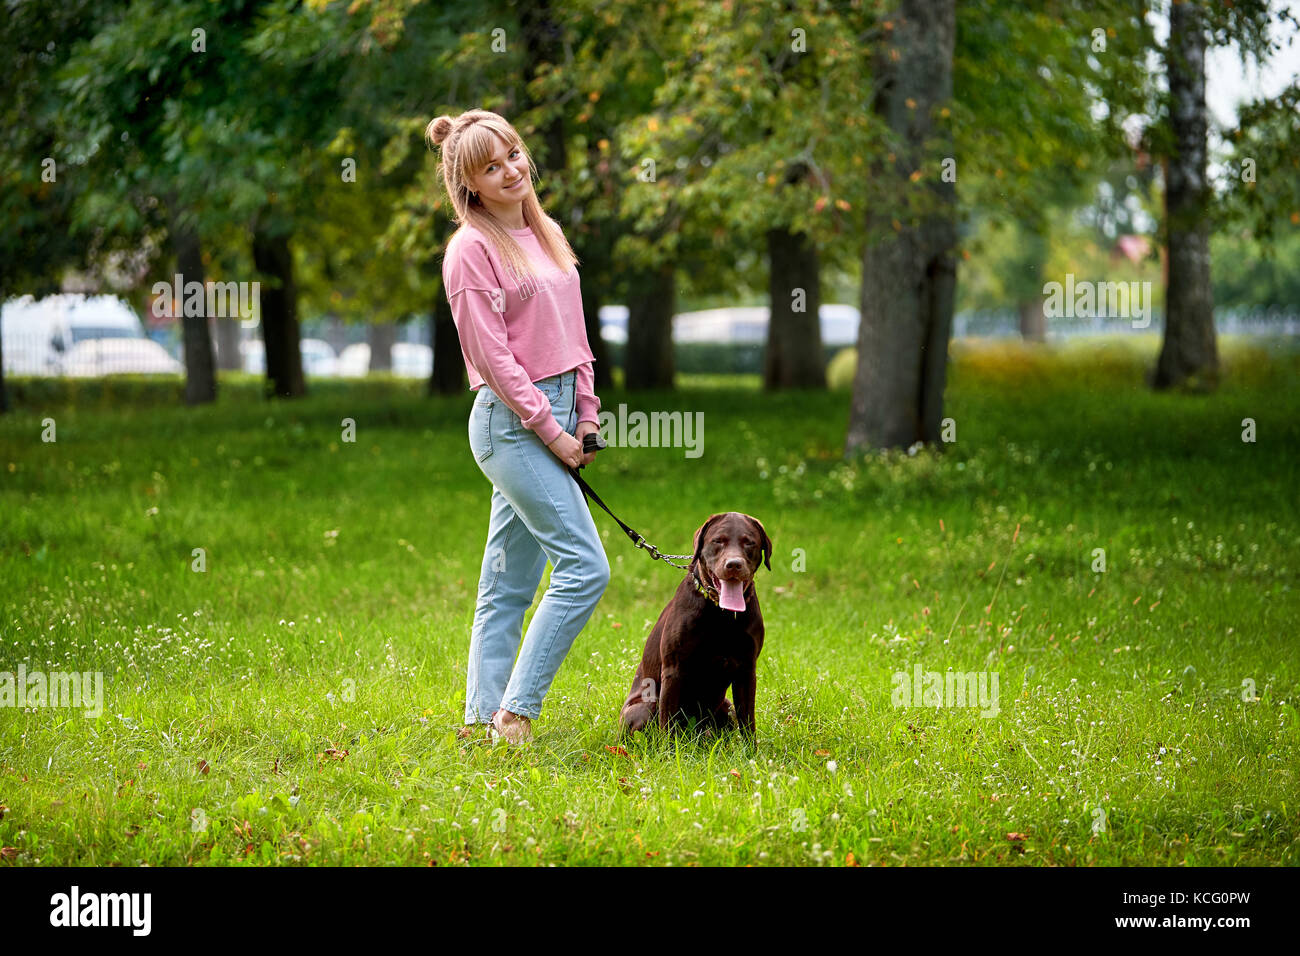 smiling girl relaxing with dog. Stock Photo